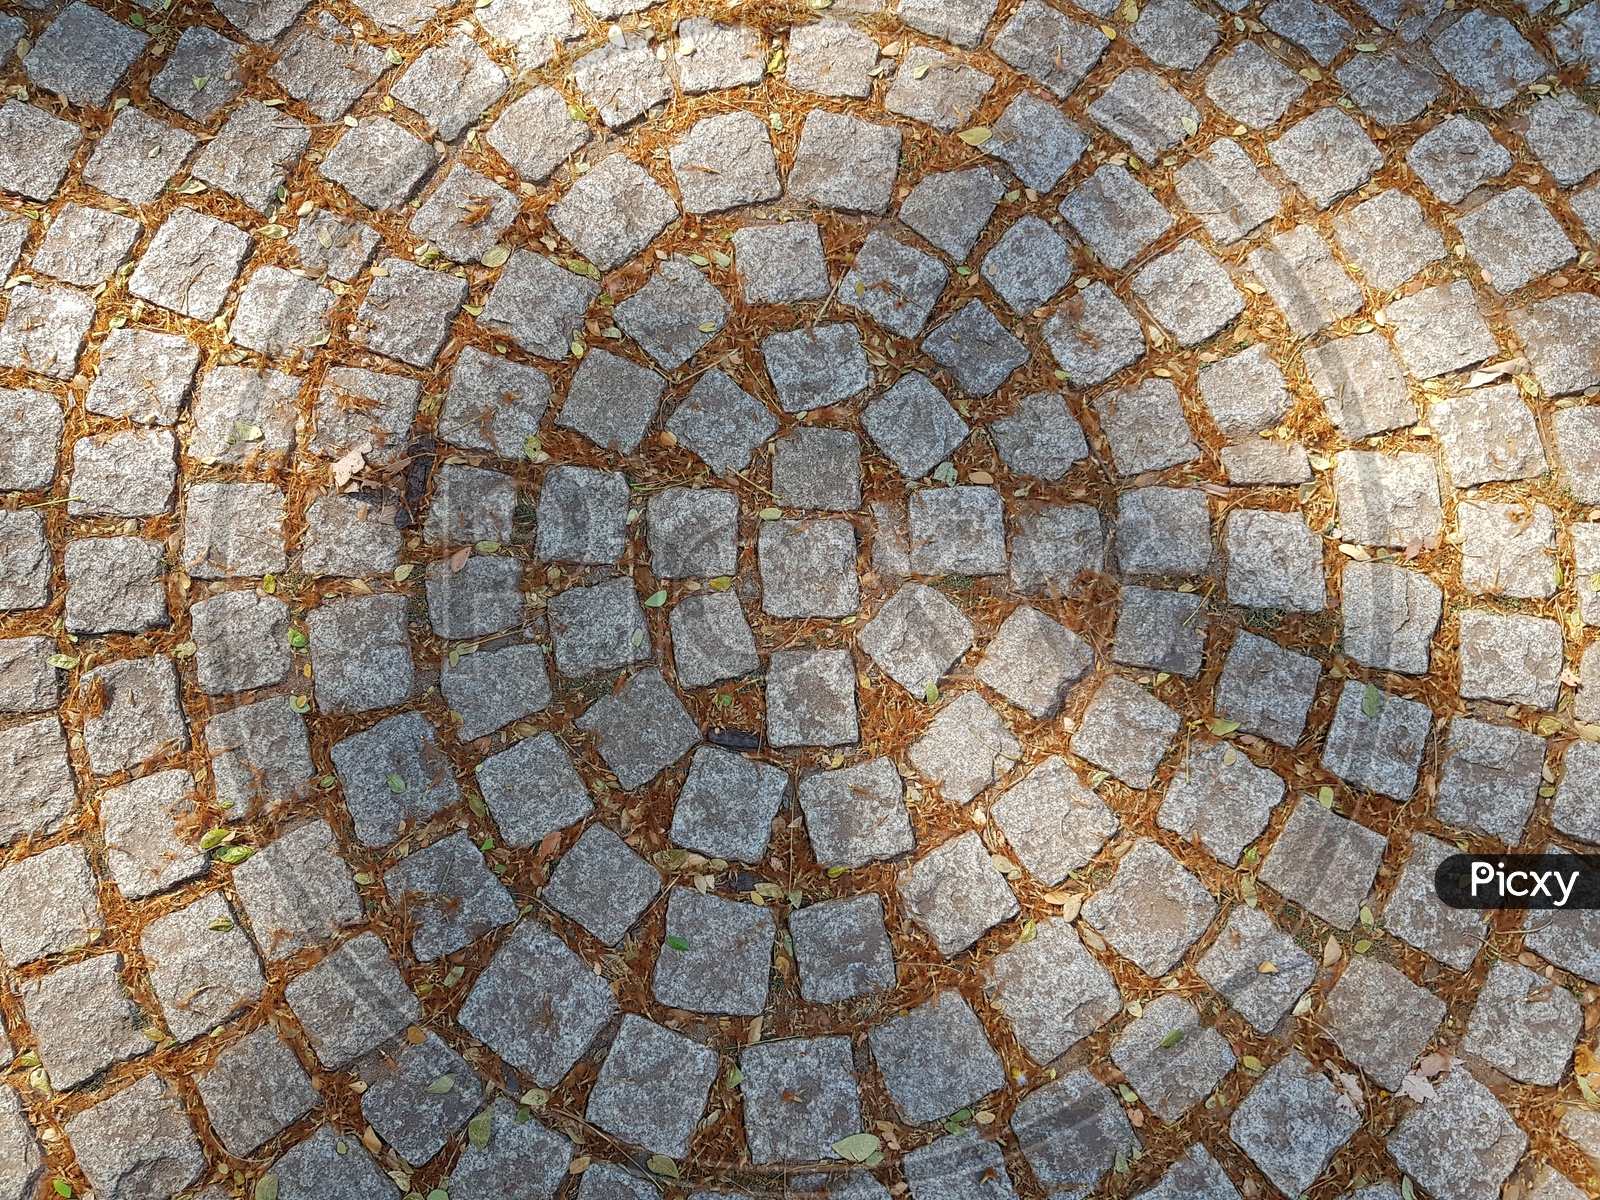 Stone Bricks Closeup With Circular Patterns On  Foot Path  Forming a Background